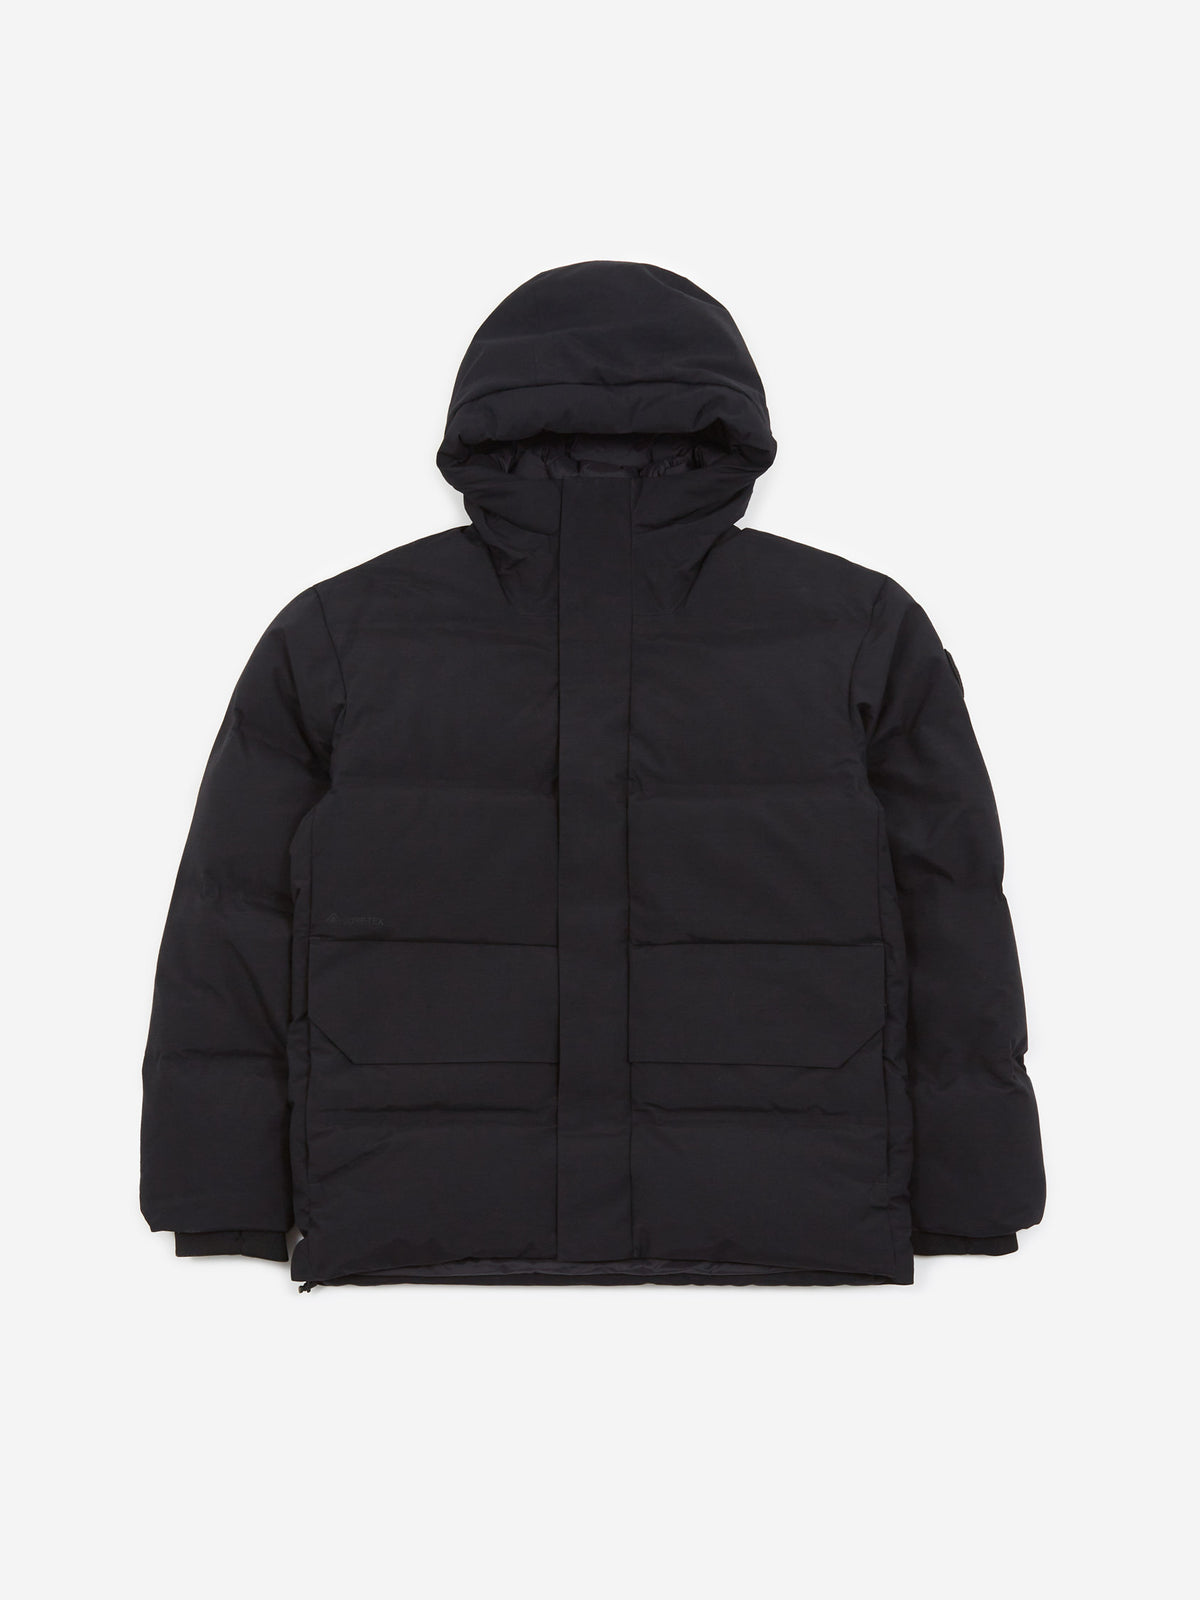 Order Norse Projects ARKTISK Mountain Parka Jacket - Black Norse Projects  today and enjoy the latest fashions